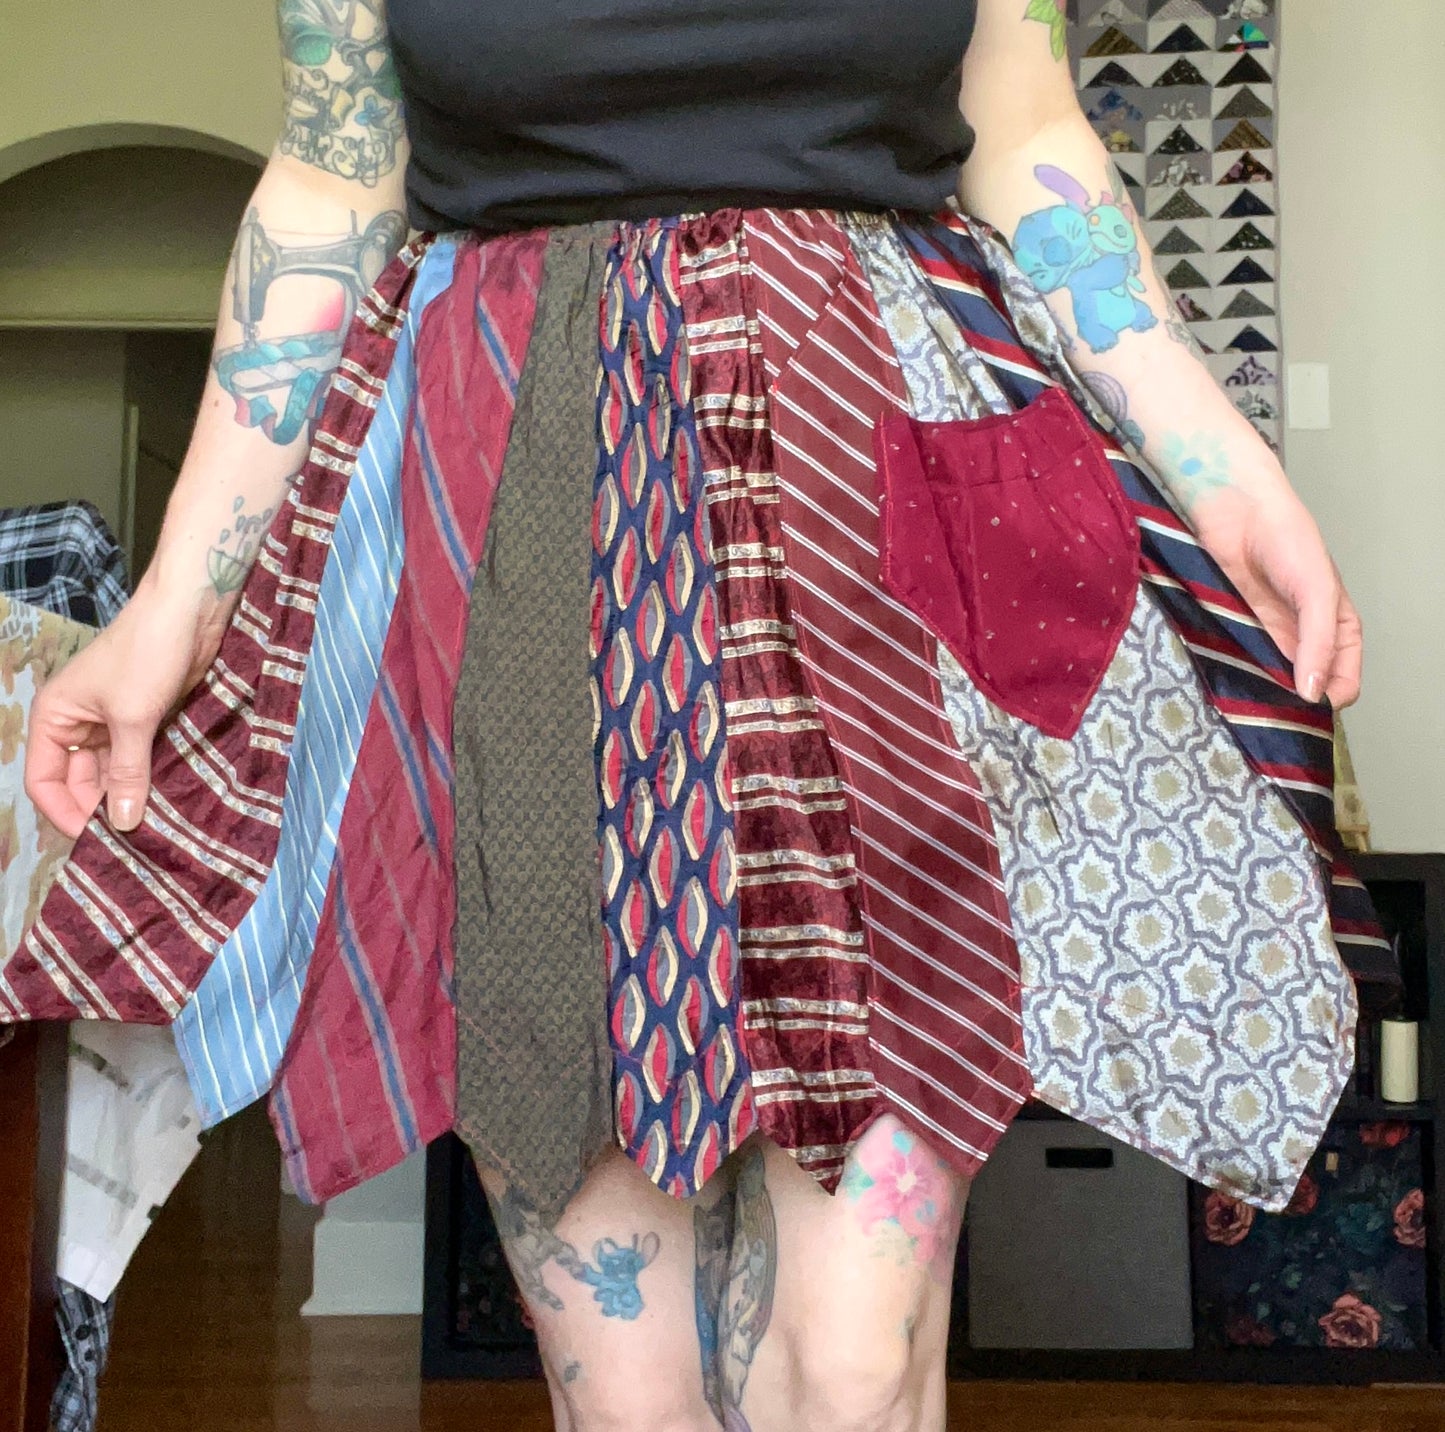 Skirt created out of neckties, as worn by tattooed model. It is held out at the sides to show fullness of the skirt